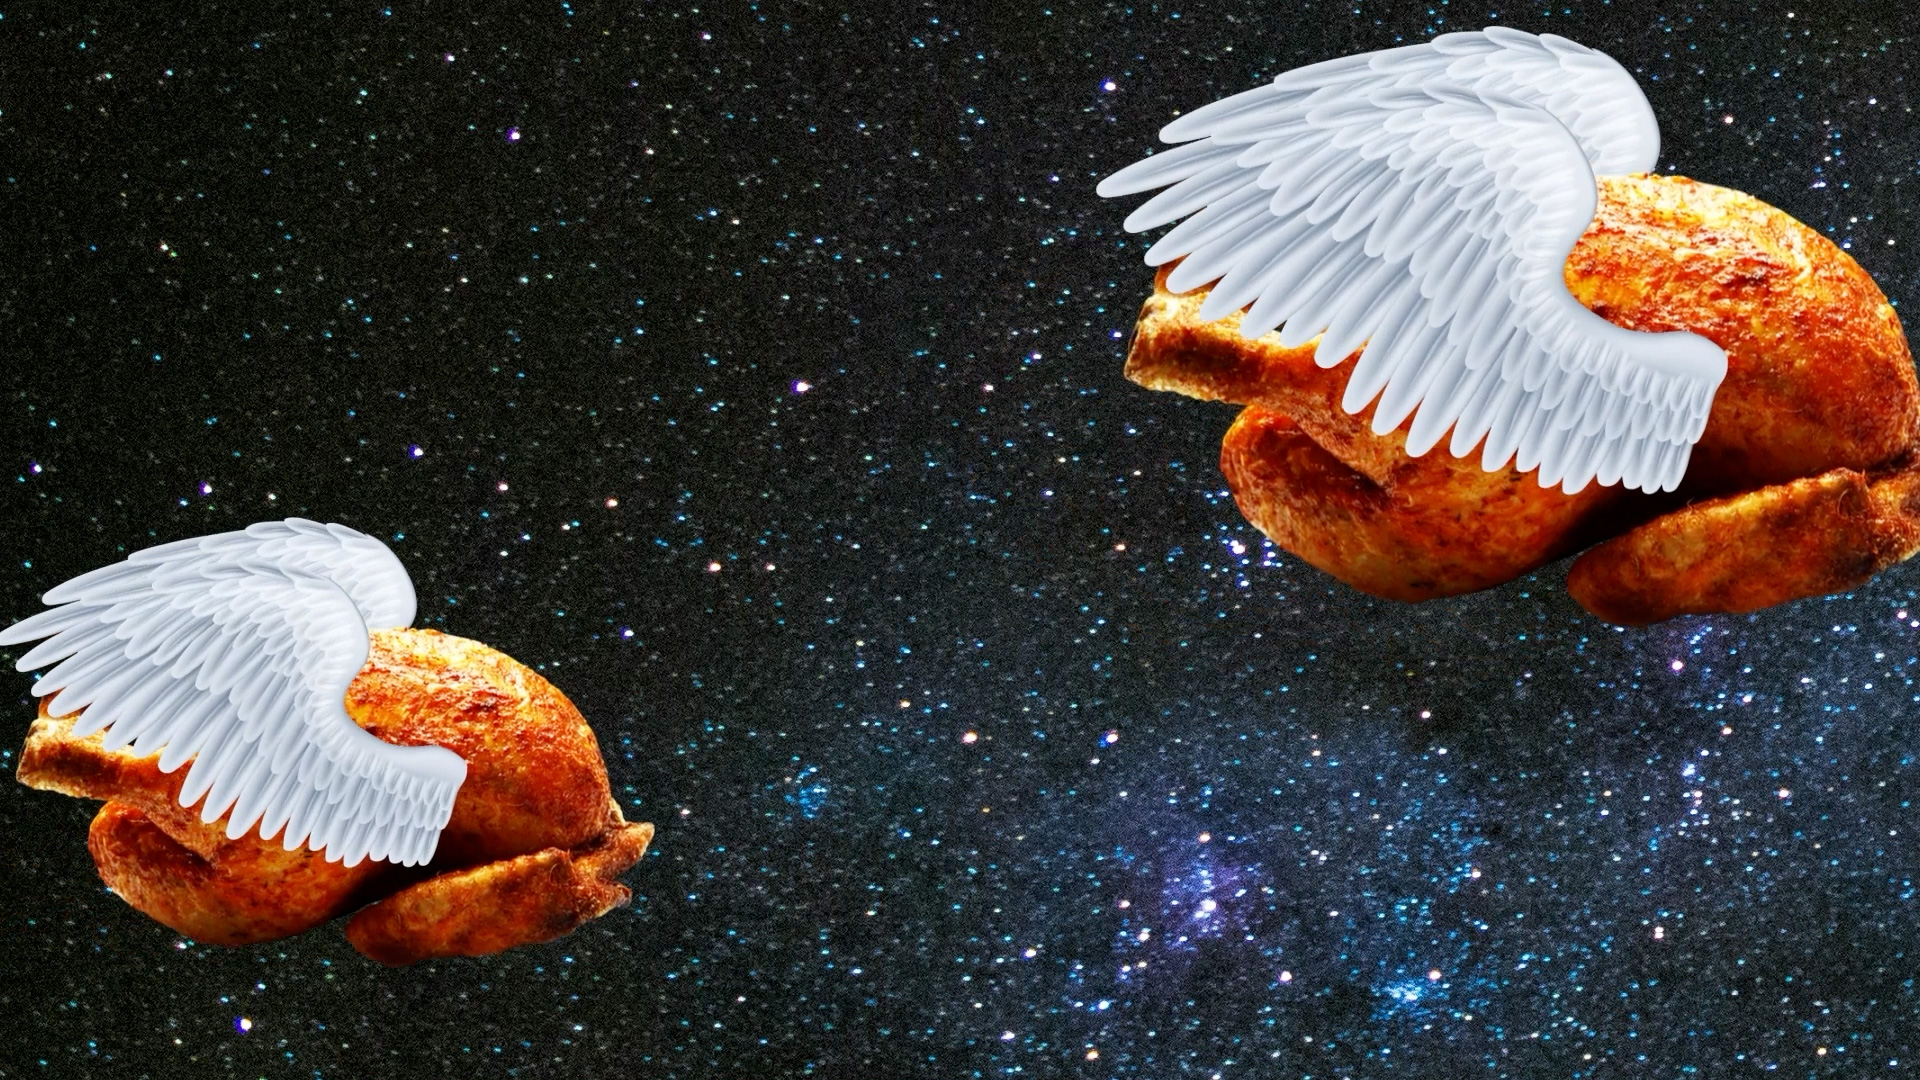 Two cooked turkeys with white wings fly through a starry sky.